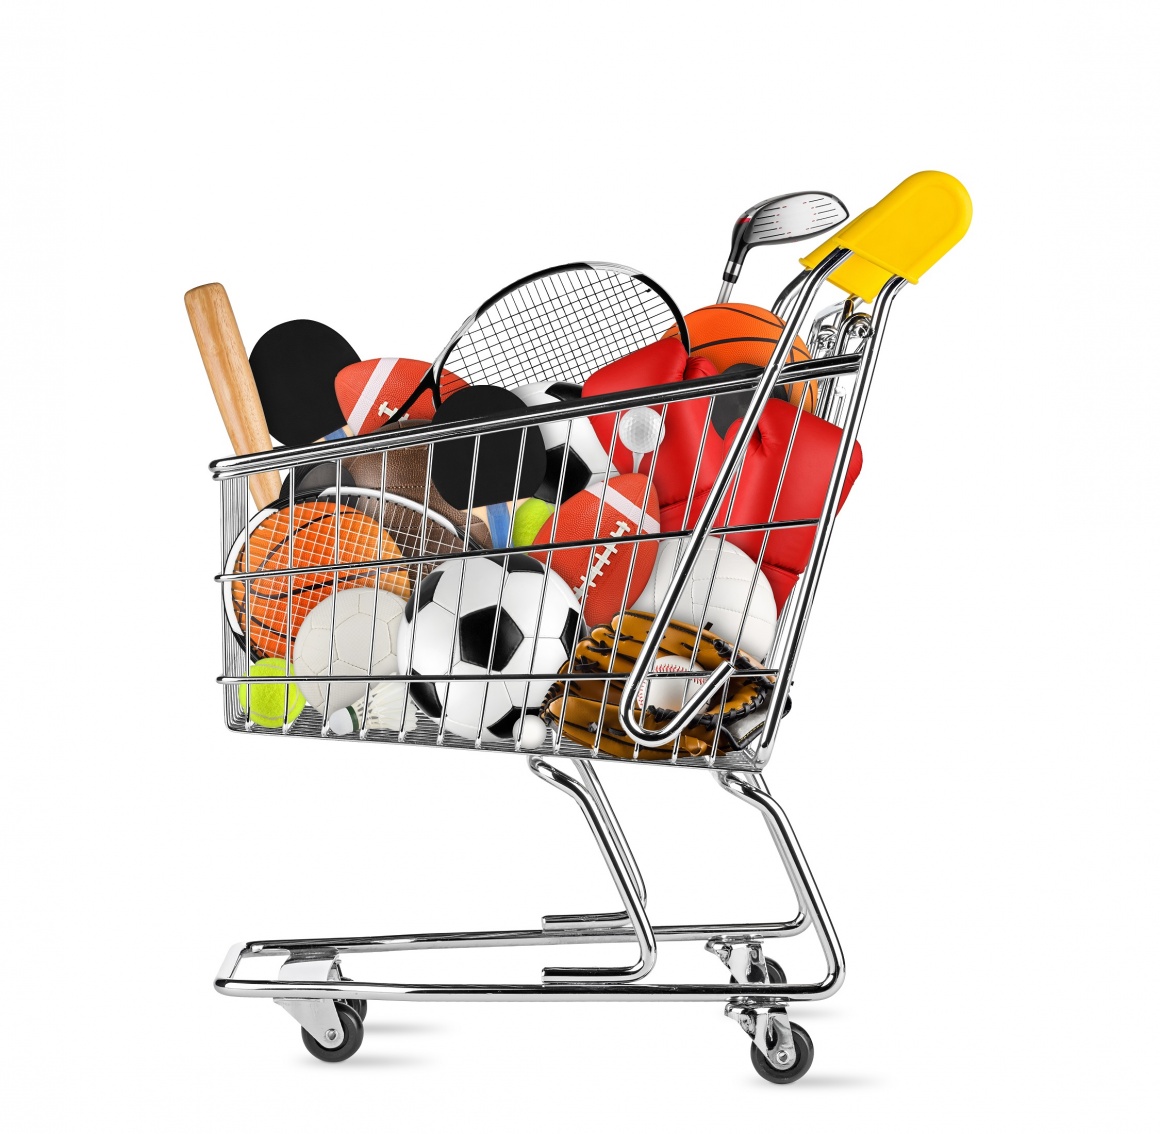 A filled shopping trolley on a white background